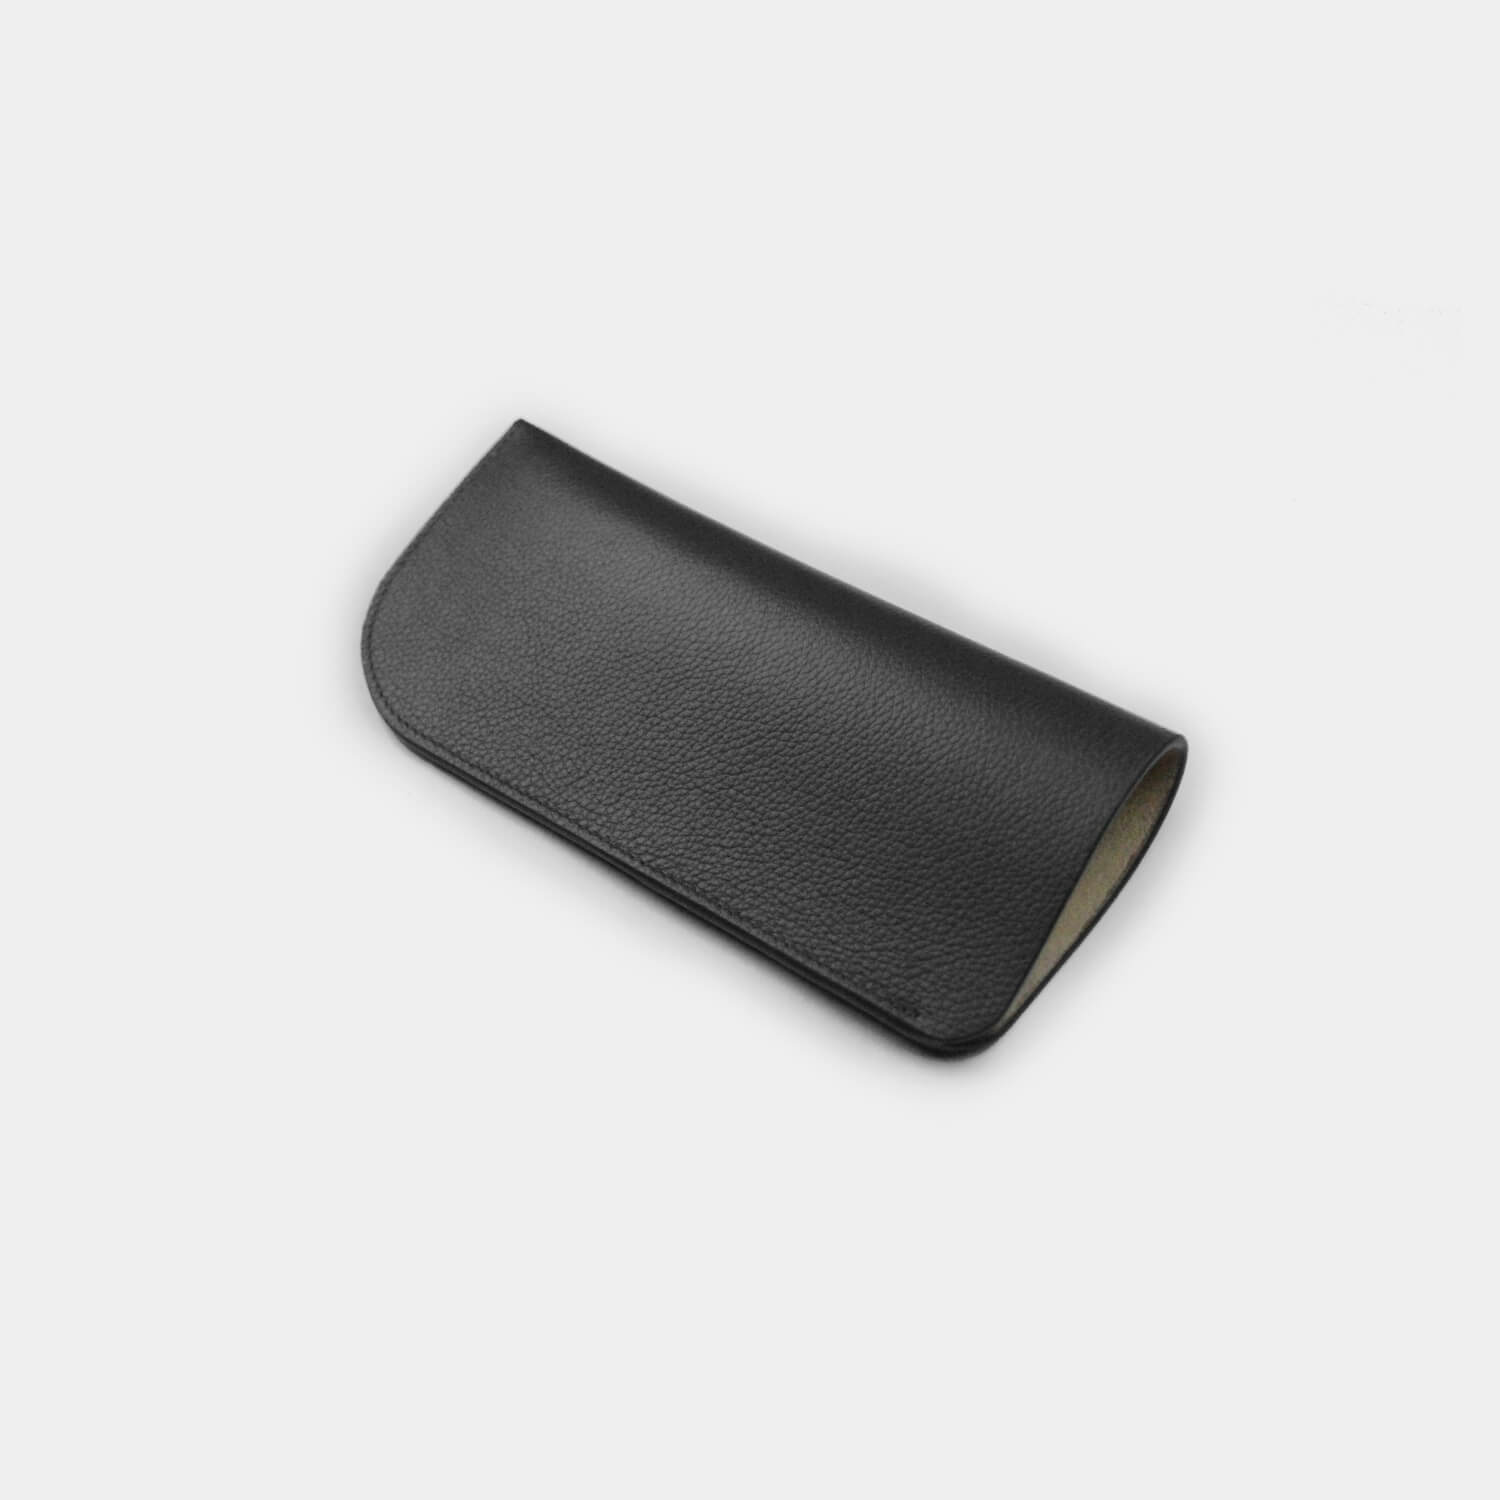 Full grain leather slip glasses case to protect and store glasses and sunglasses, branded with your company logo